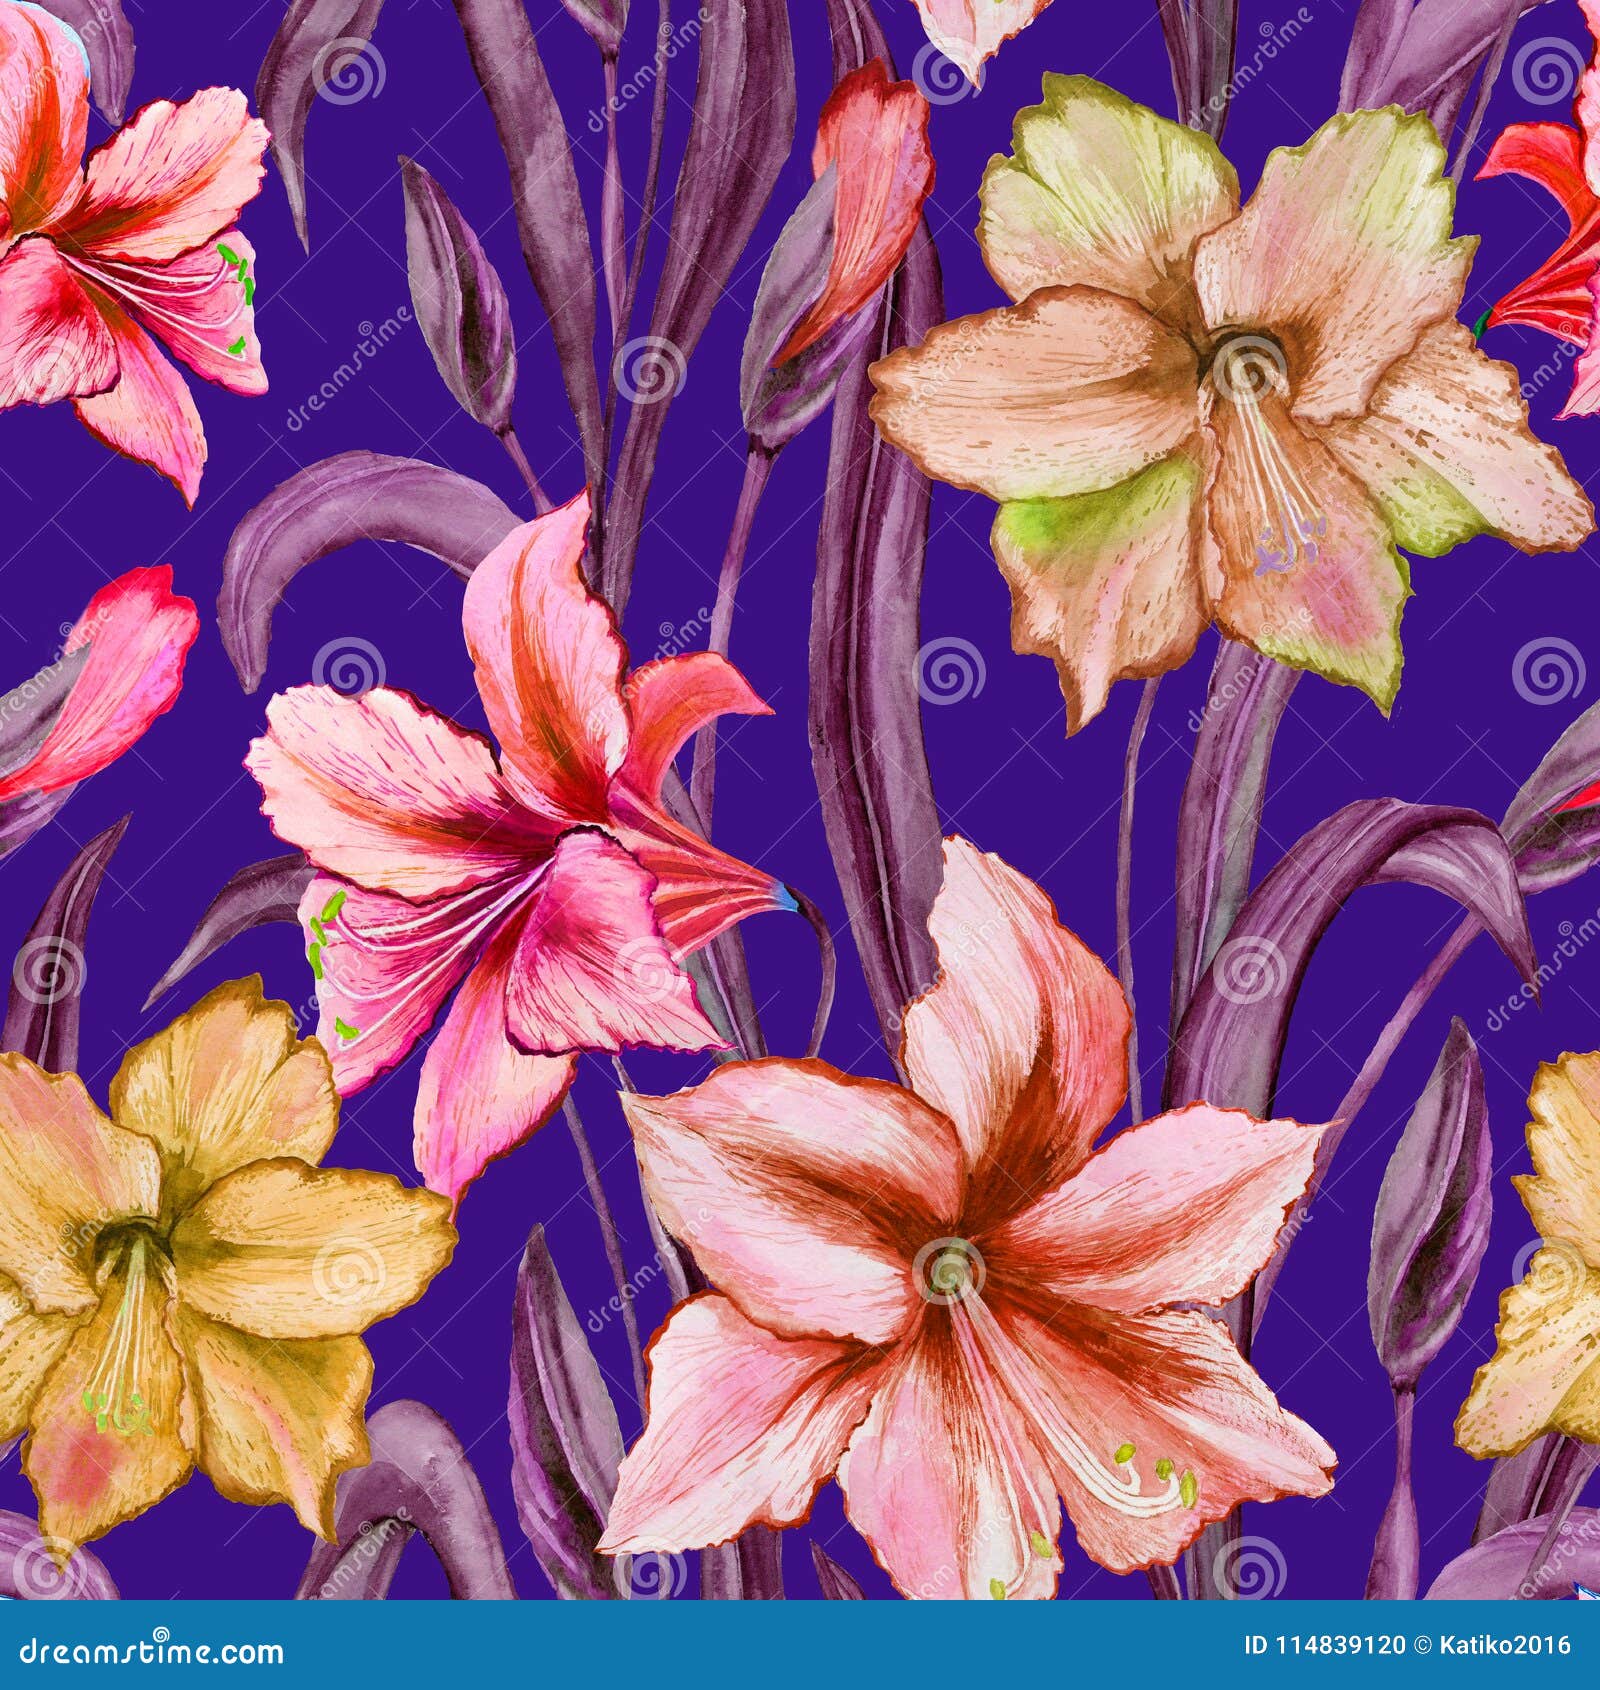 Seamless spring floral background with a dense pattern of pretty